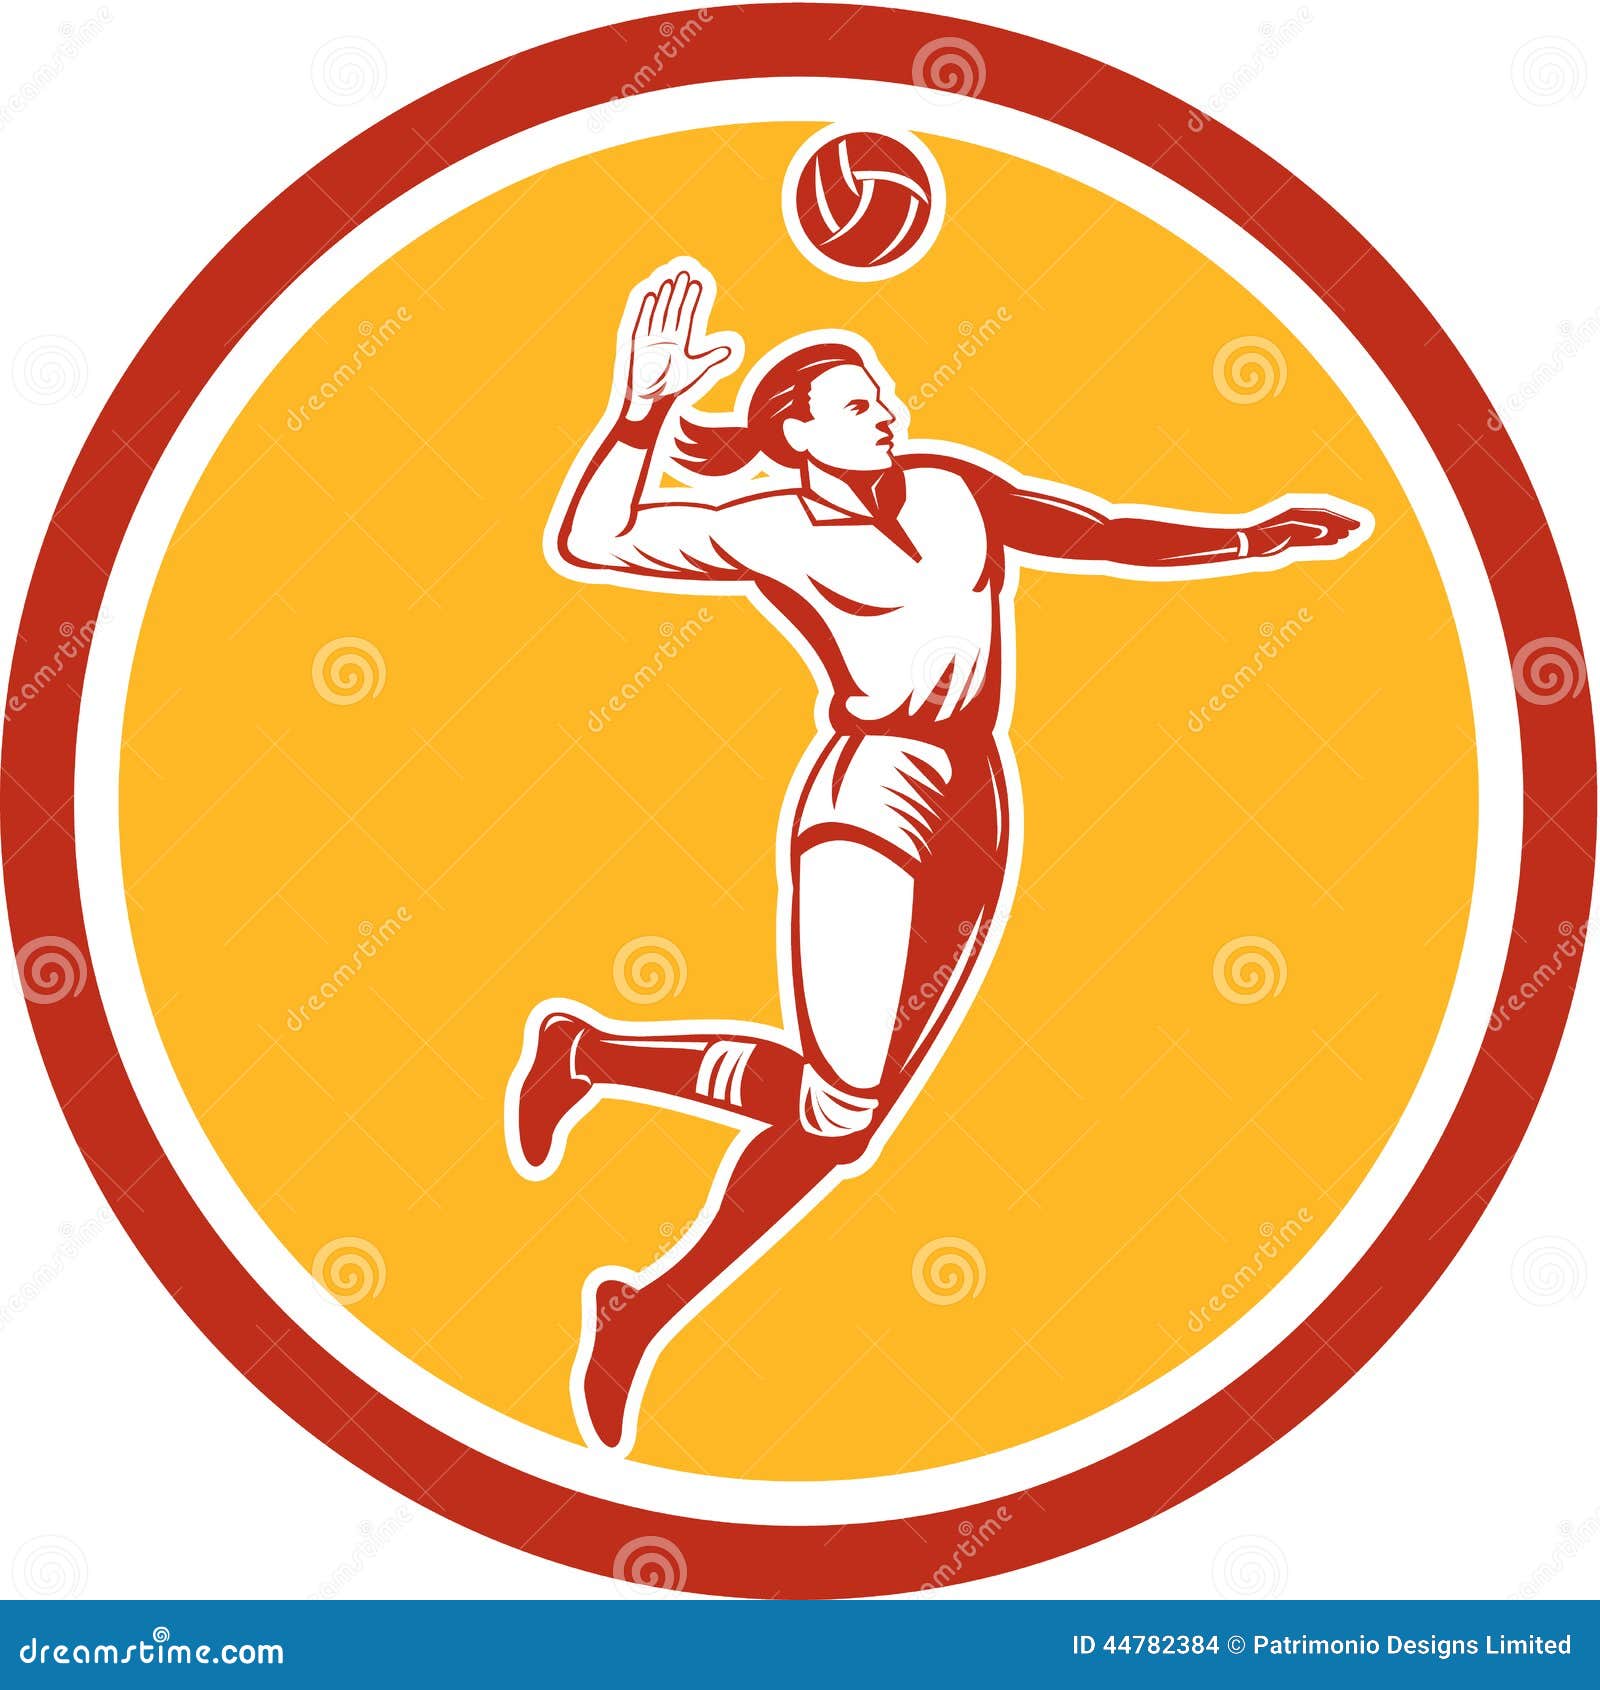 Volleyball Player Spiking Ball Circle Retro Stock Vector - Illustration ...